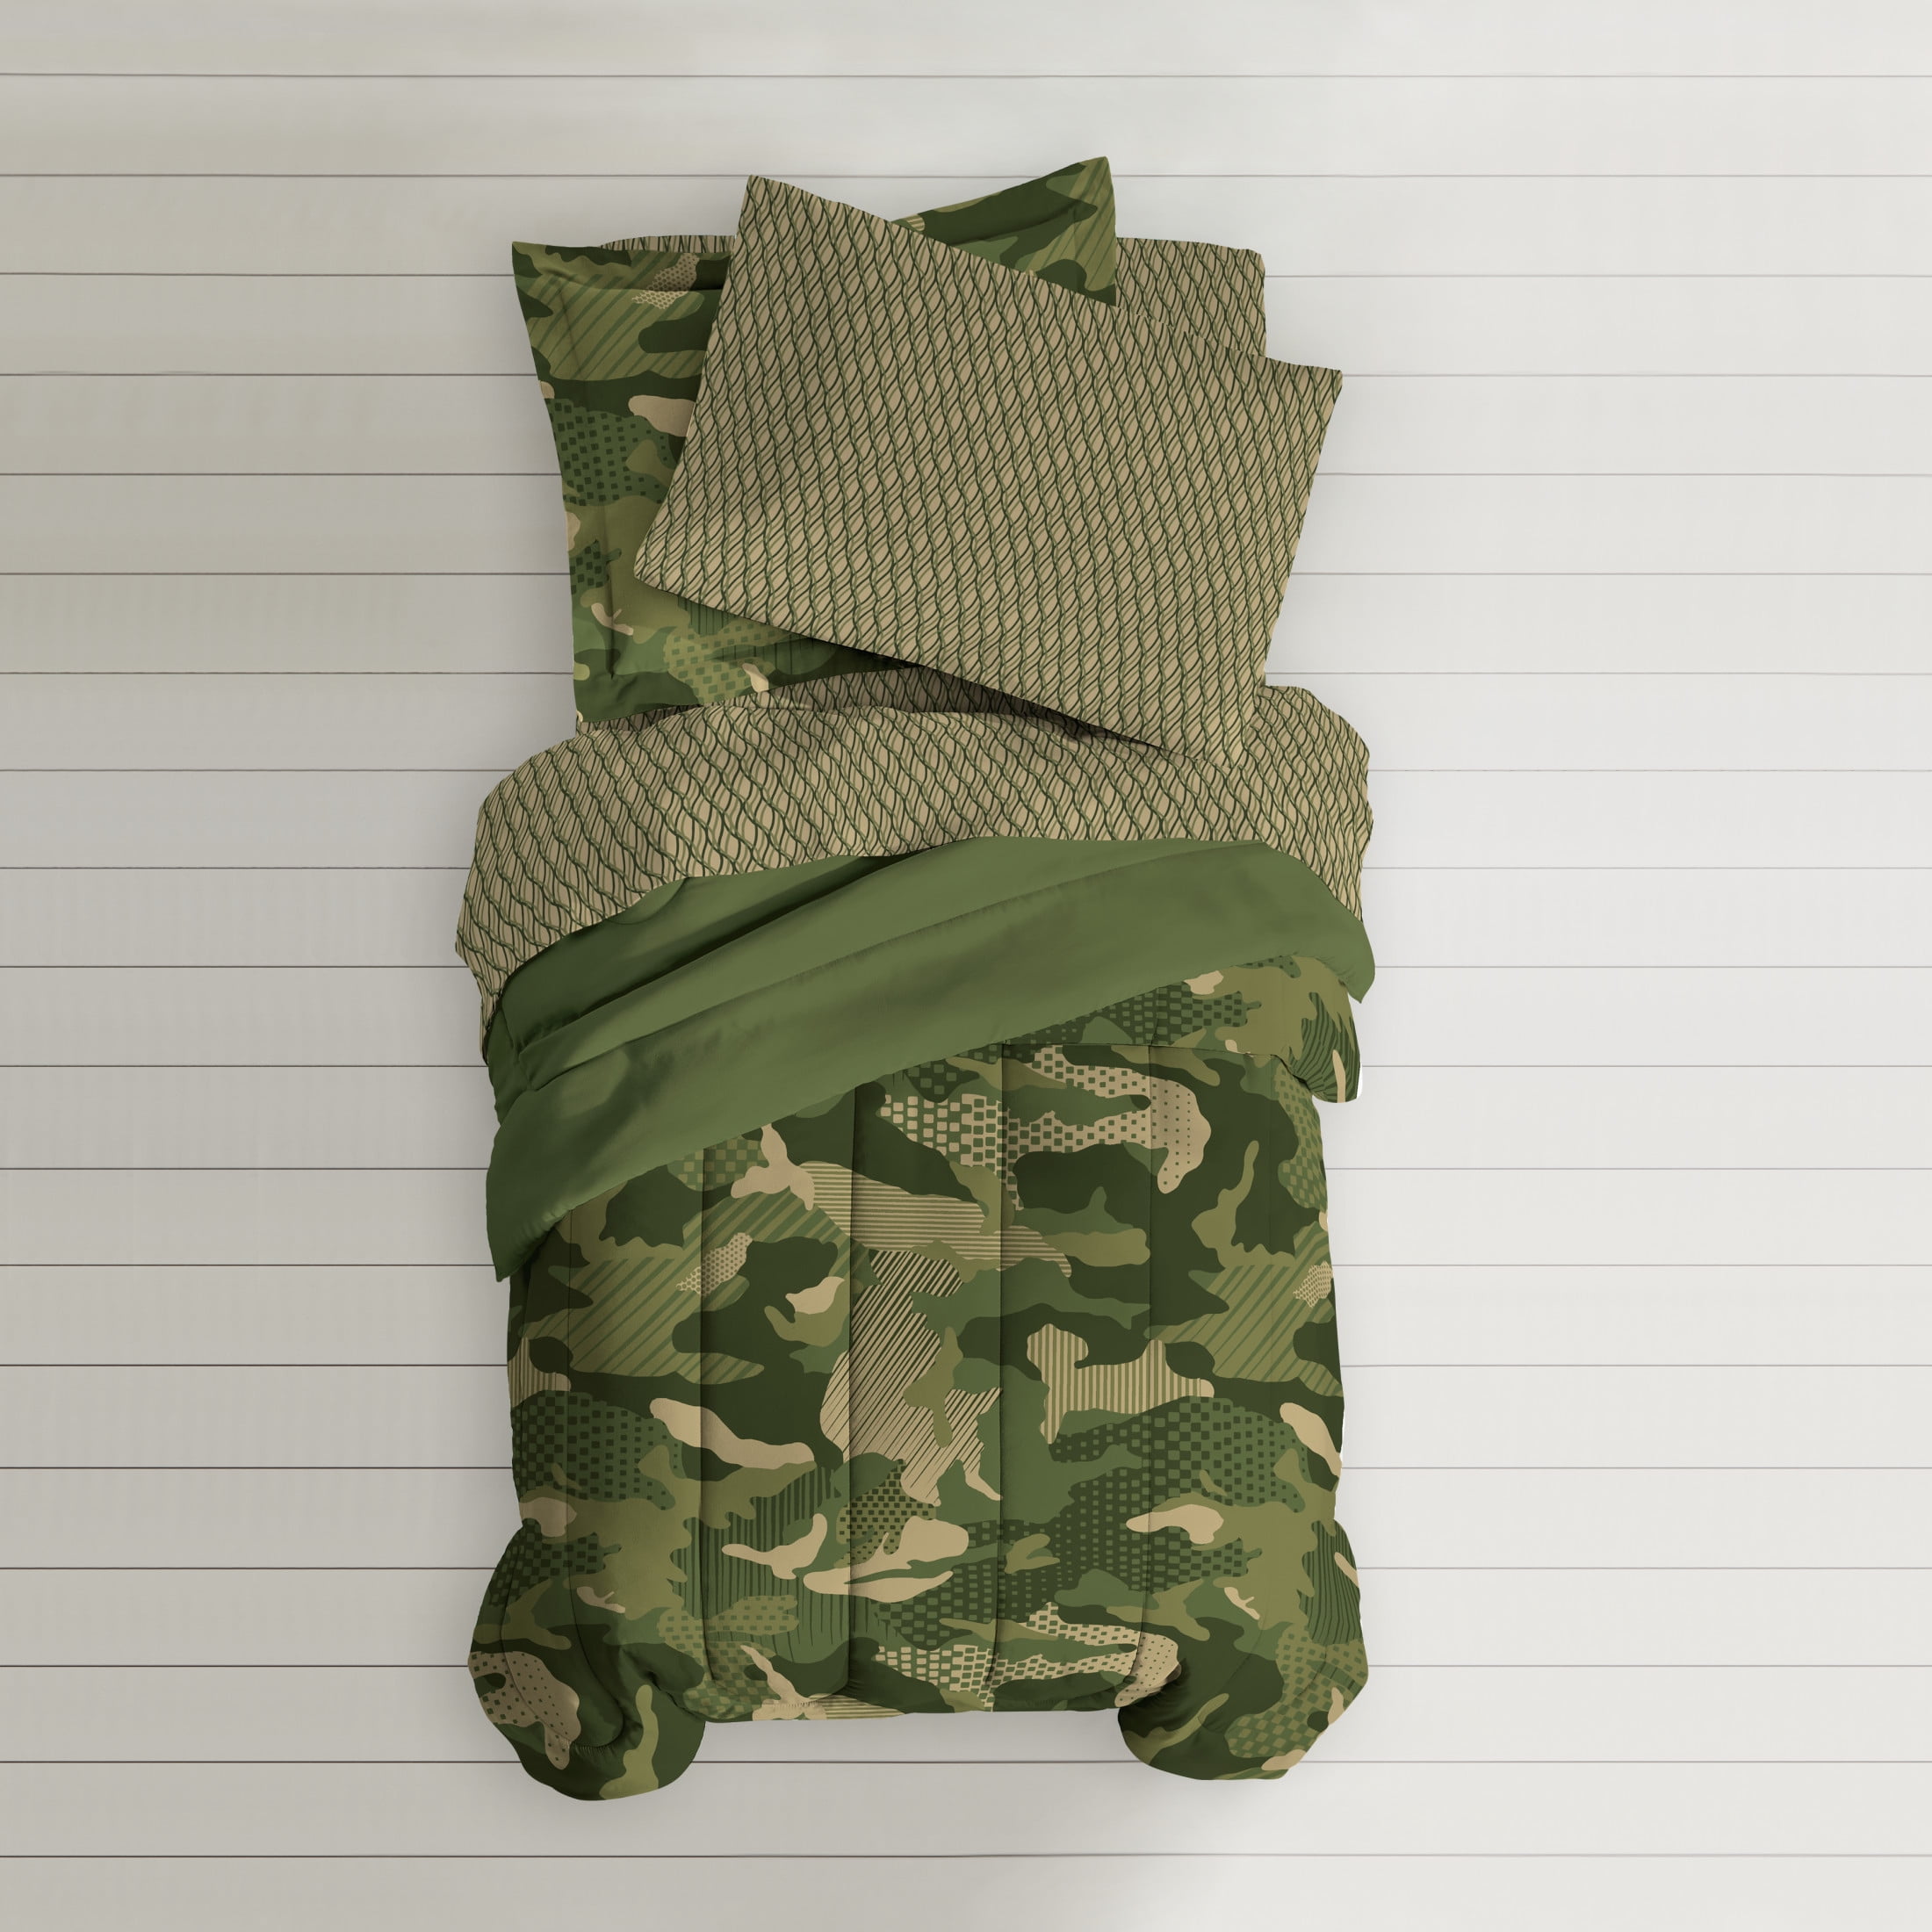 Dream Factory Easy-wash Super Soft Comforter Bedding Twin Green Geo Camo L1 for sale online 